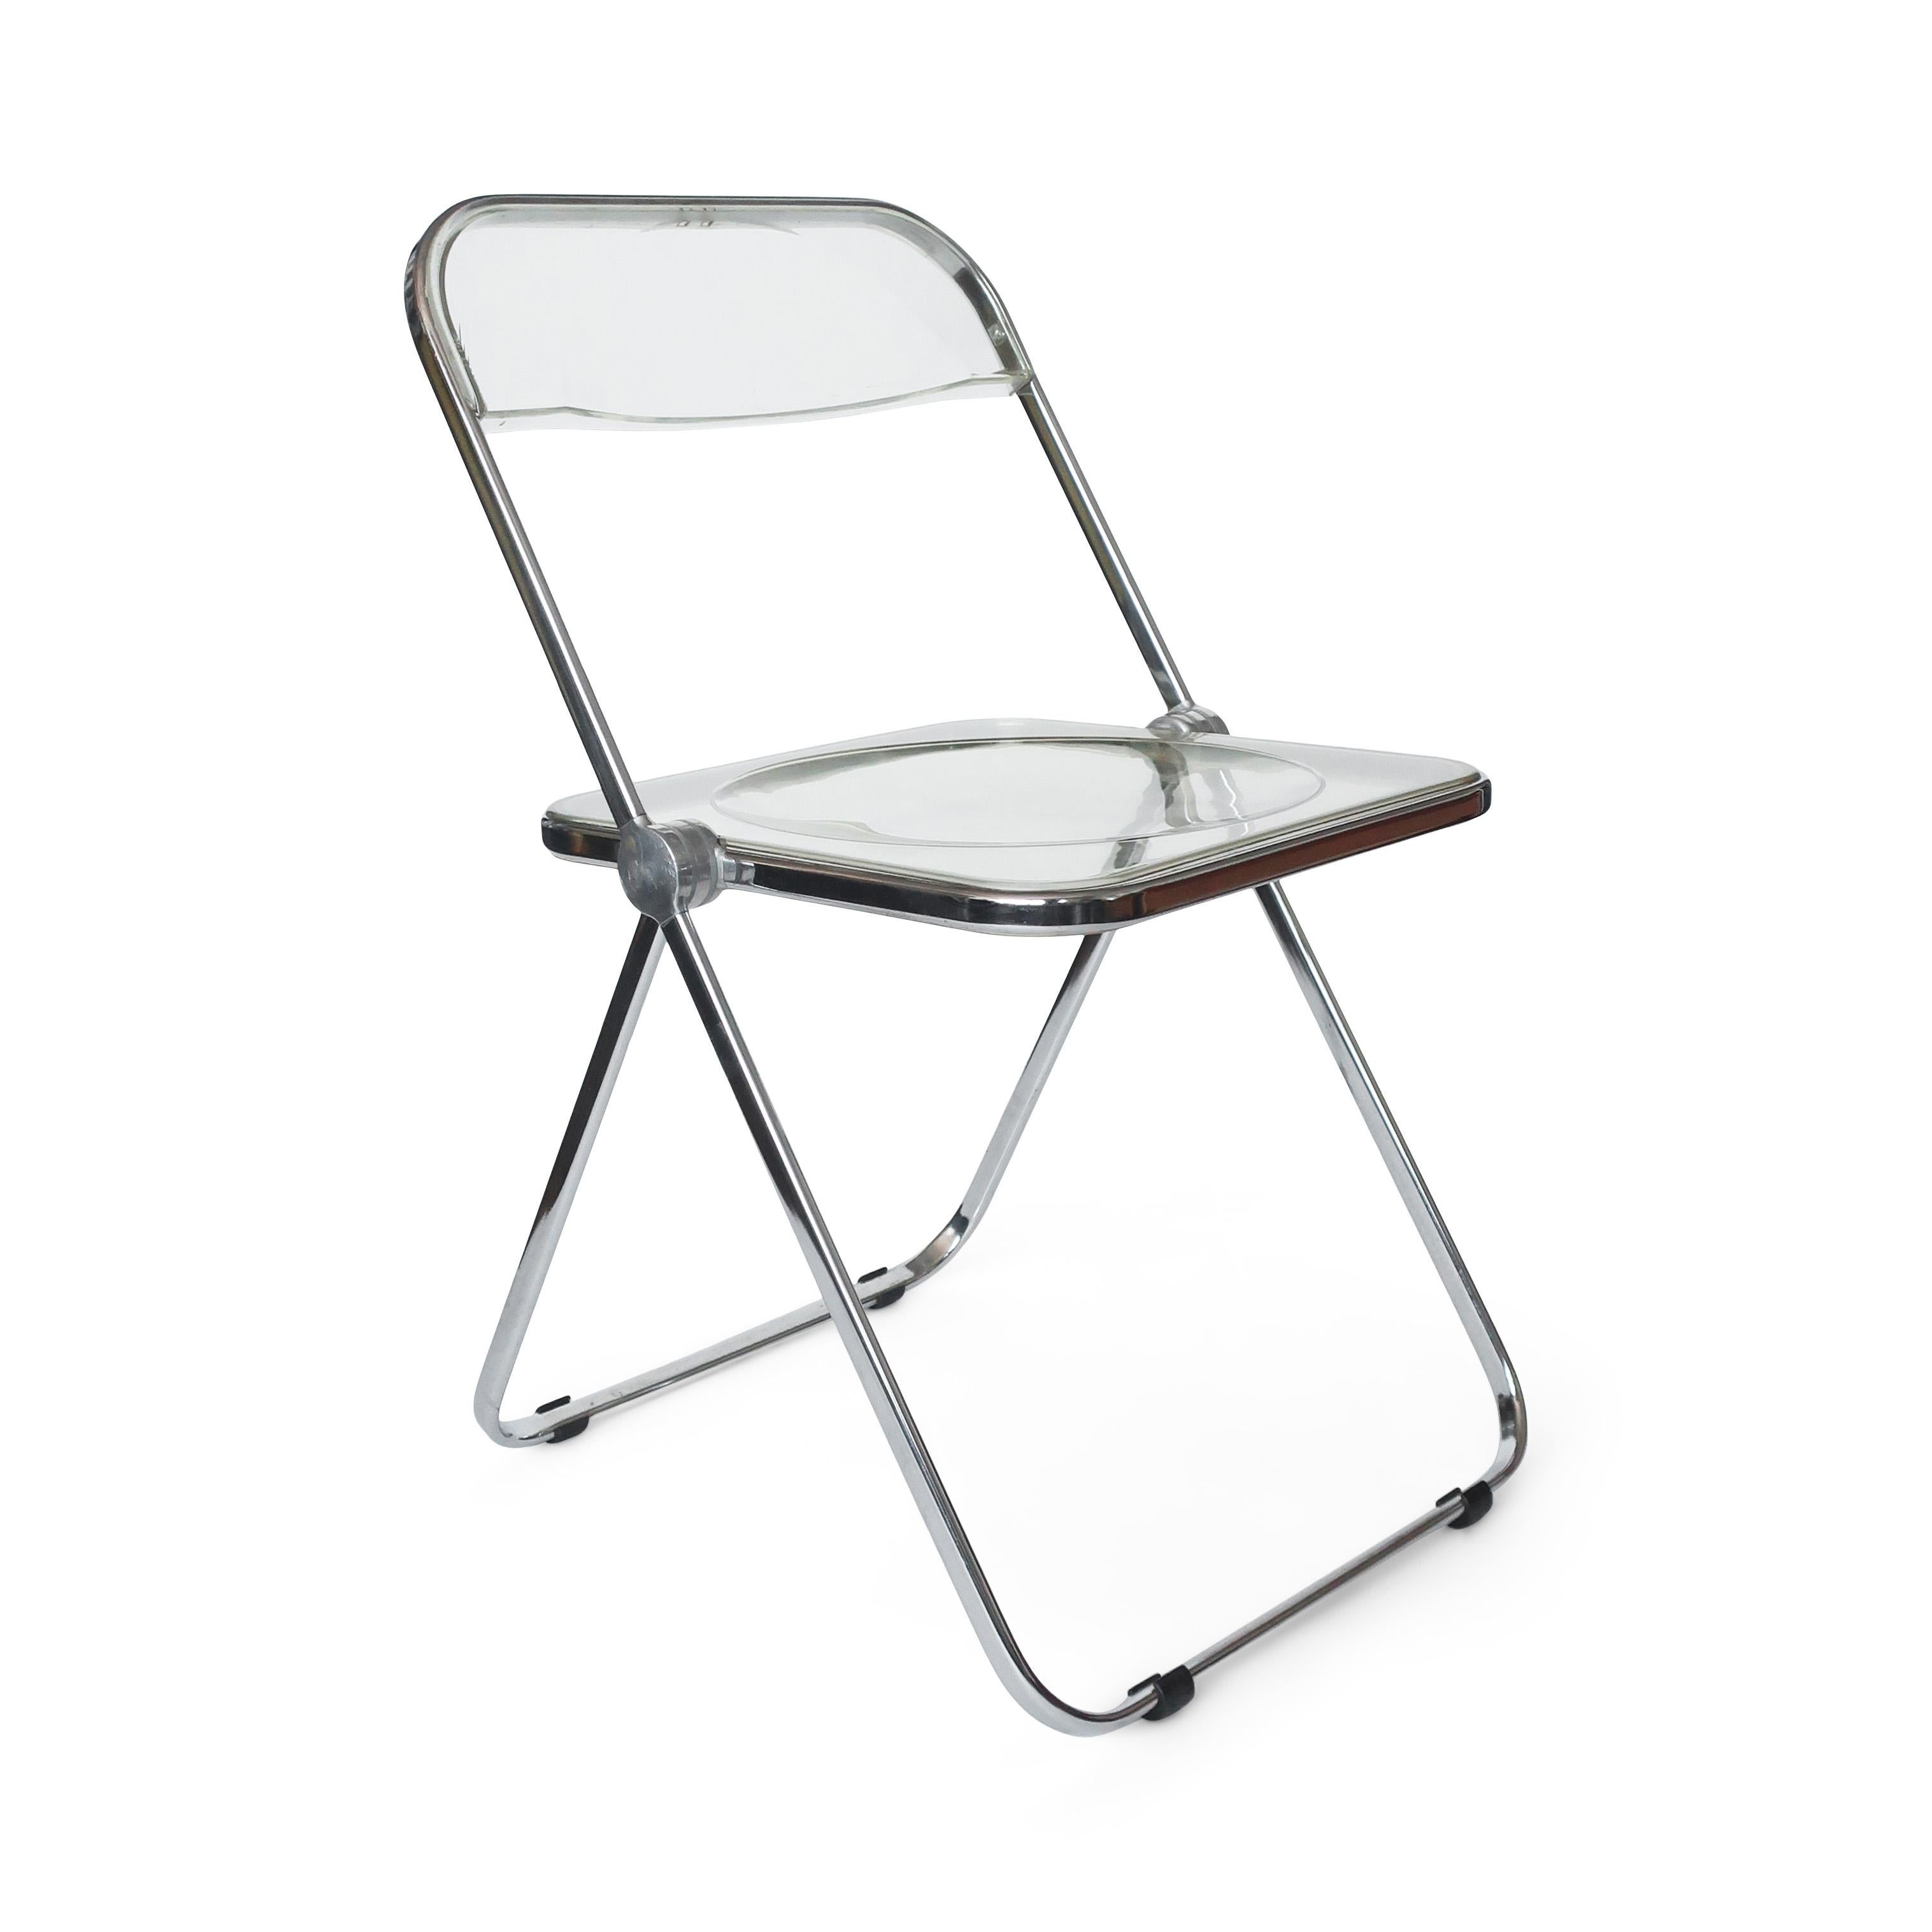 A pair of iconic Plia lucite and chrome folding chairs designed by Giancarlo Piretti for Castelli. Clear acrylic seats and back and a folding chrome frame.

In good vintage condition with wear consistent with age and use. Maker’s mark on chair’s